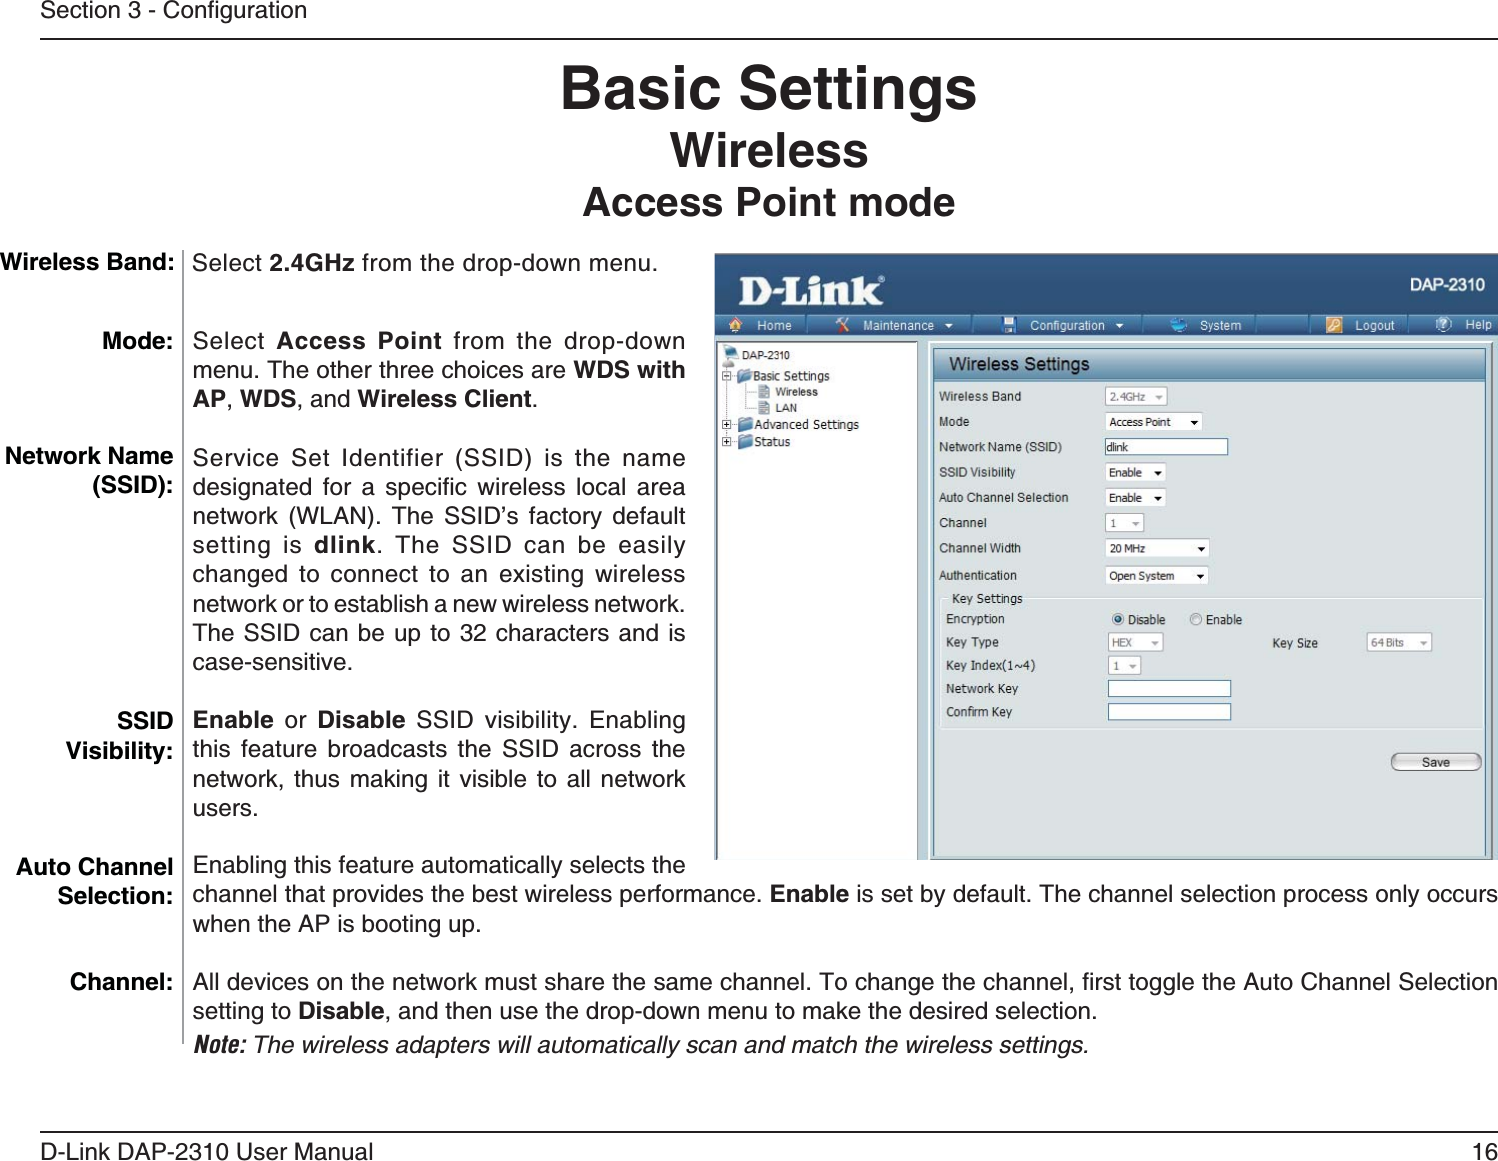 16D-Link DAP-2310 User ManualBasic SettingsWireless Access Point modeSelect Access Point from the drop-down menu. The other three choices are WDS with AP, WDS, and Wireless Client.                 setting is dlink. The SSID can be easily changed to connect to an existing wireless network or to establish a new wireless network. The SSID can be up to 32 characters and is case-sensitive.Enable or Disable SSID visibility. Enabling this feature broadcasts the SSID across the network, thus making it visible to all network users.Enabling this feature automatically selects the channel that provides the best wireless performance. Enable is set by default. The channel selection process only occurs when the AP is booting up.setting to Disable, and then use the drop-down menu to make the desired selection. Note: The wireless adapters will automatically scan and match the wireless settings.Mode:Network Name (SSID):SSID Visibility:Auto Channel Selection:Channel:Wireless Band: Select 2.4GHz from the drop-down menu. 